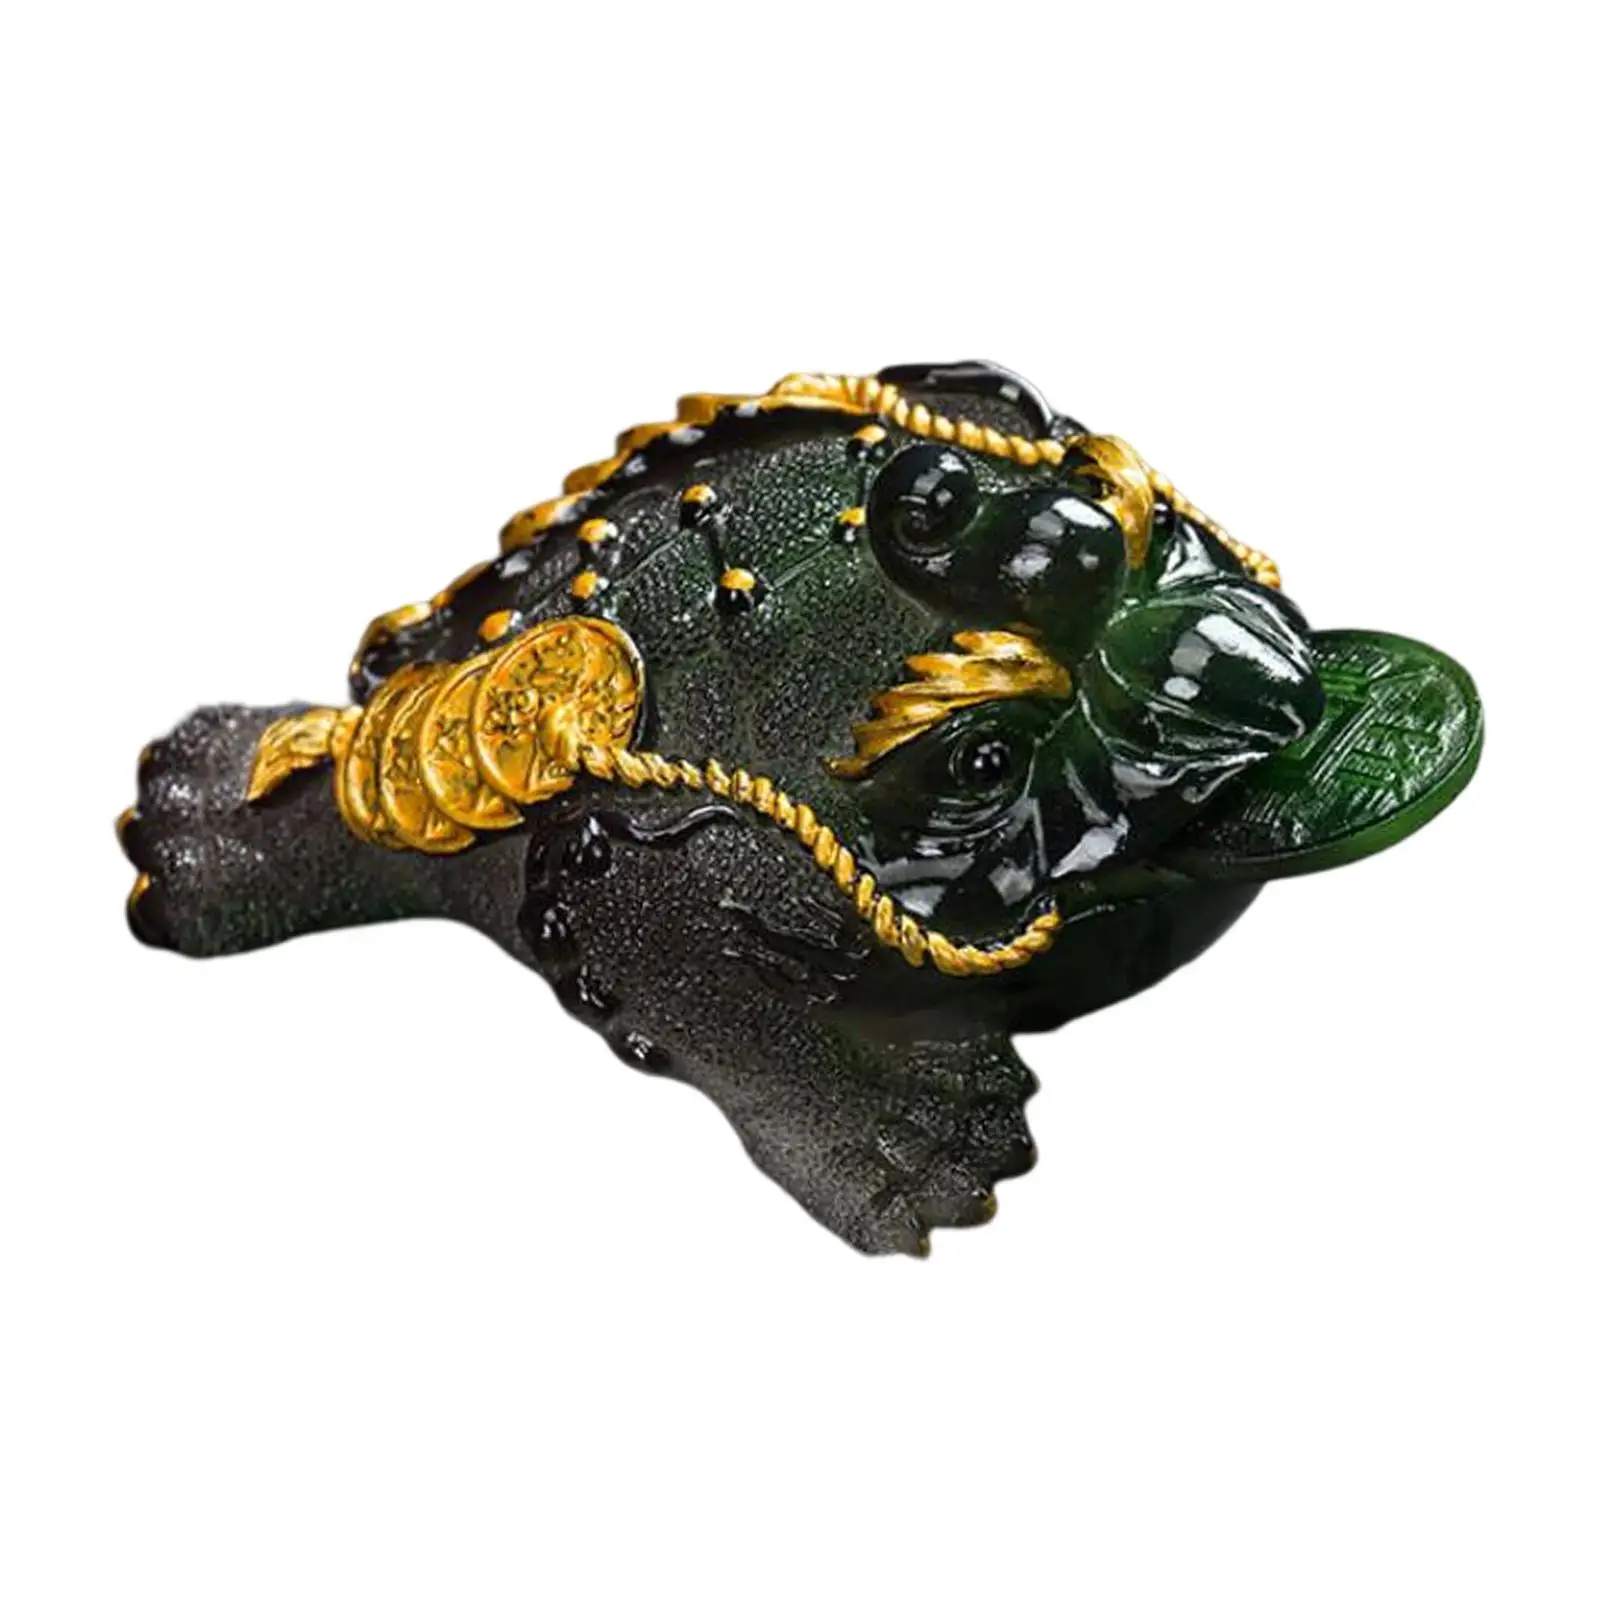 Tea Pet Ornament Resin Crafts Kungfu Color Changing Toad Figurine for Tea Table Tea Tray Tea Accessories Decoration